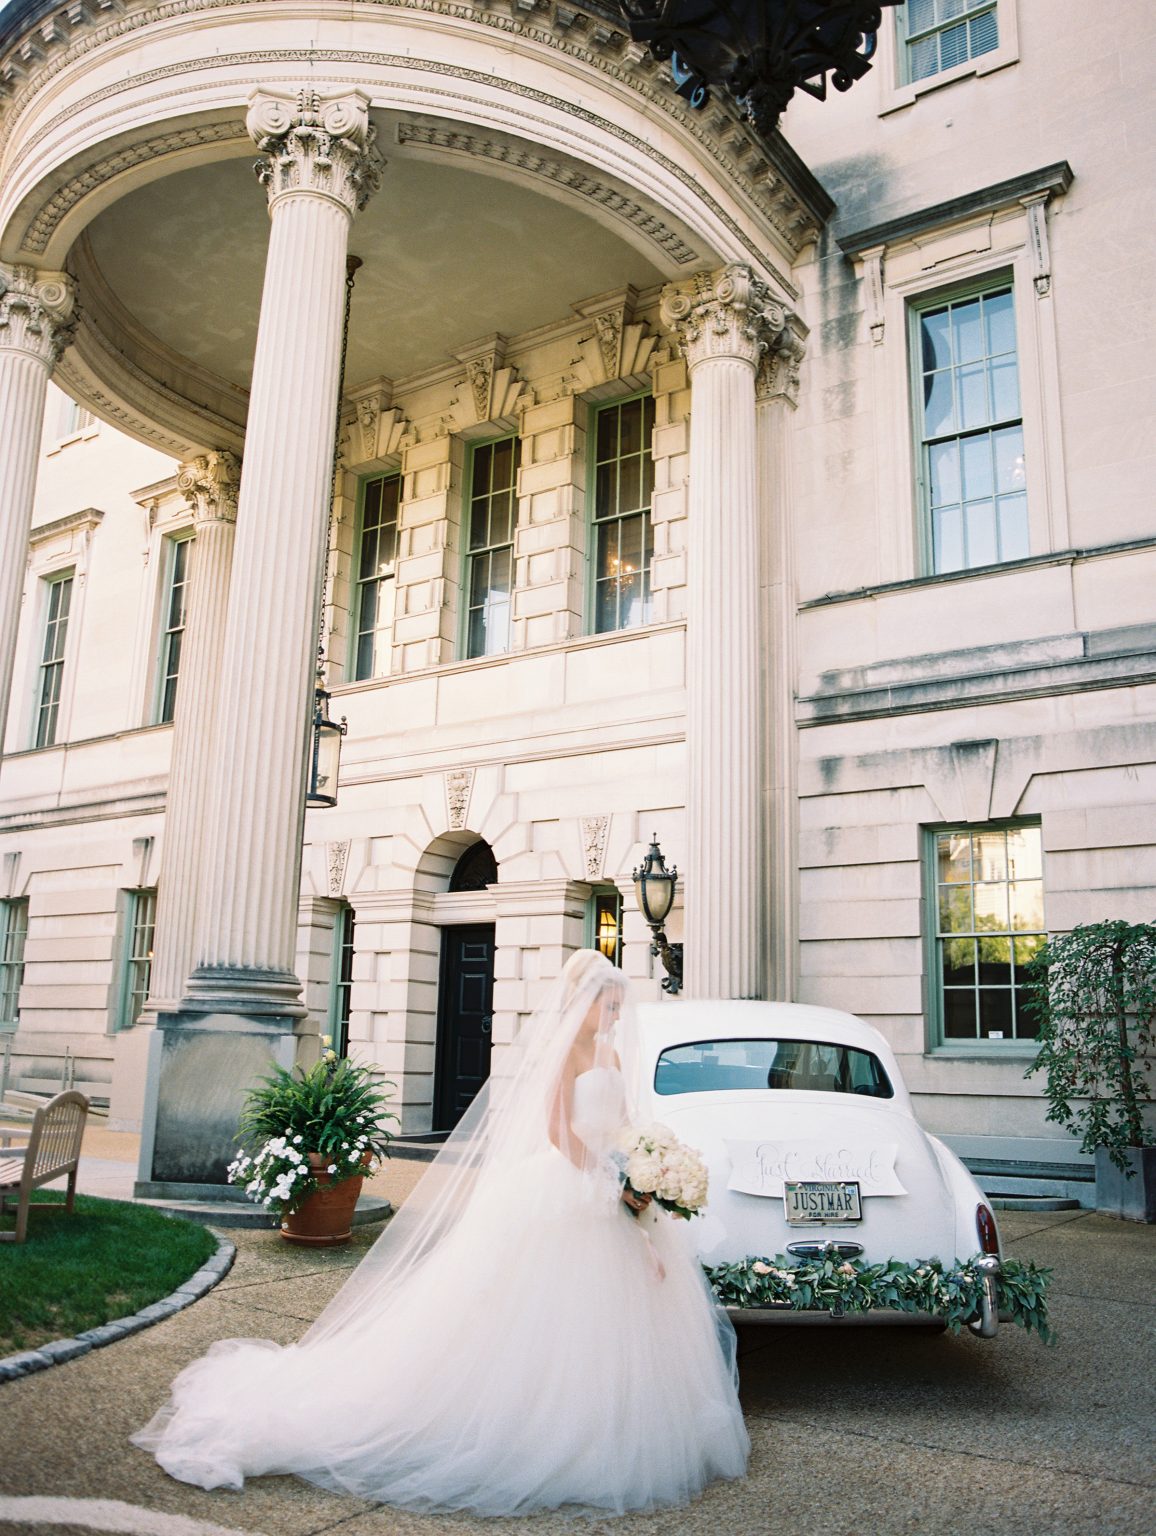 <h2>The bride arrives in style</h2>Photo by Abby Jiu. Lauryn Prattes, planner.